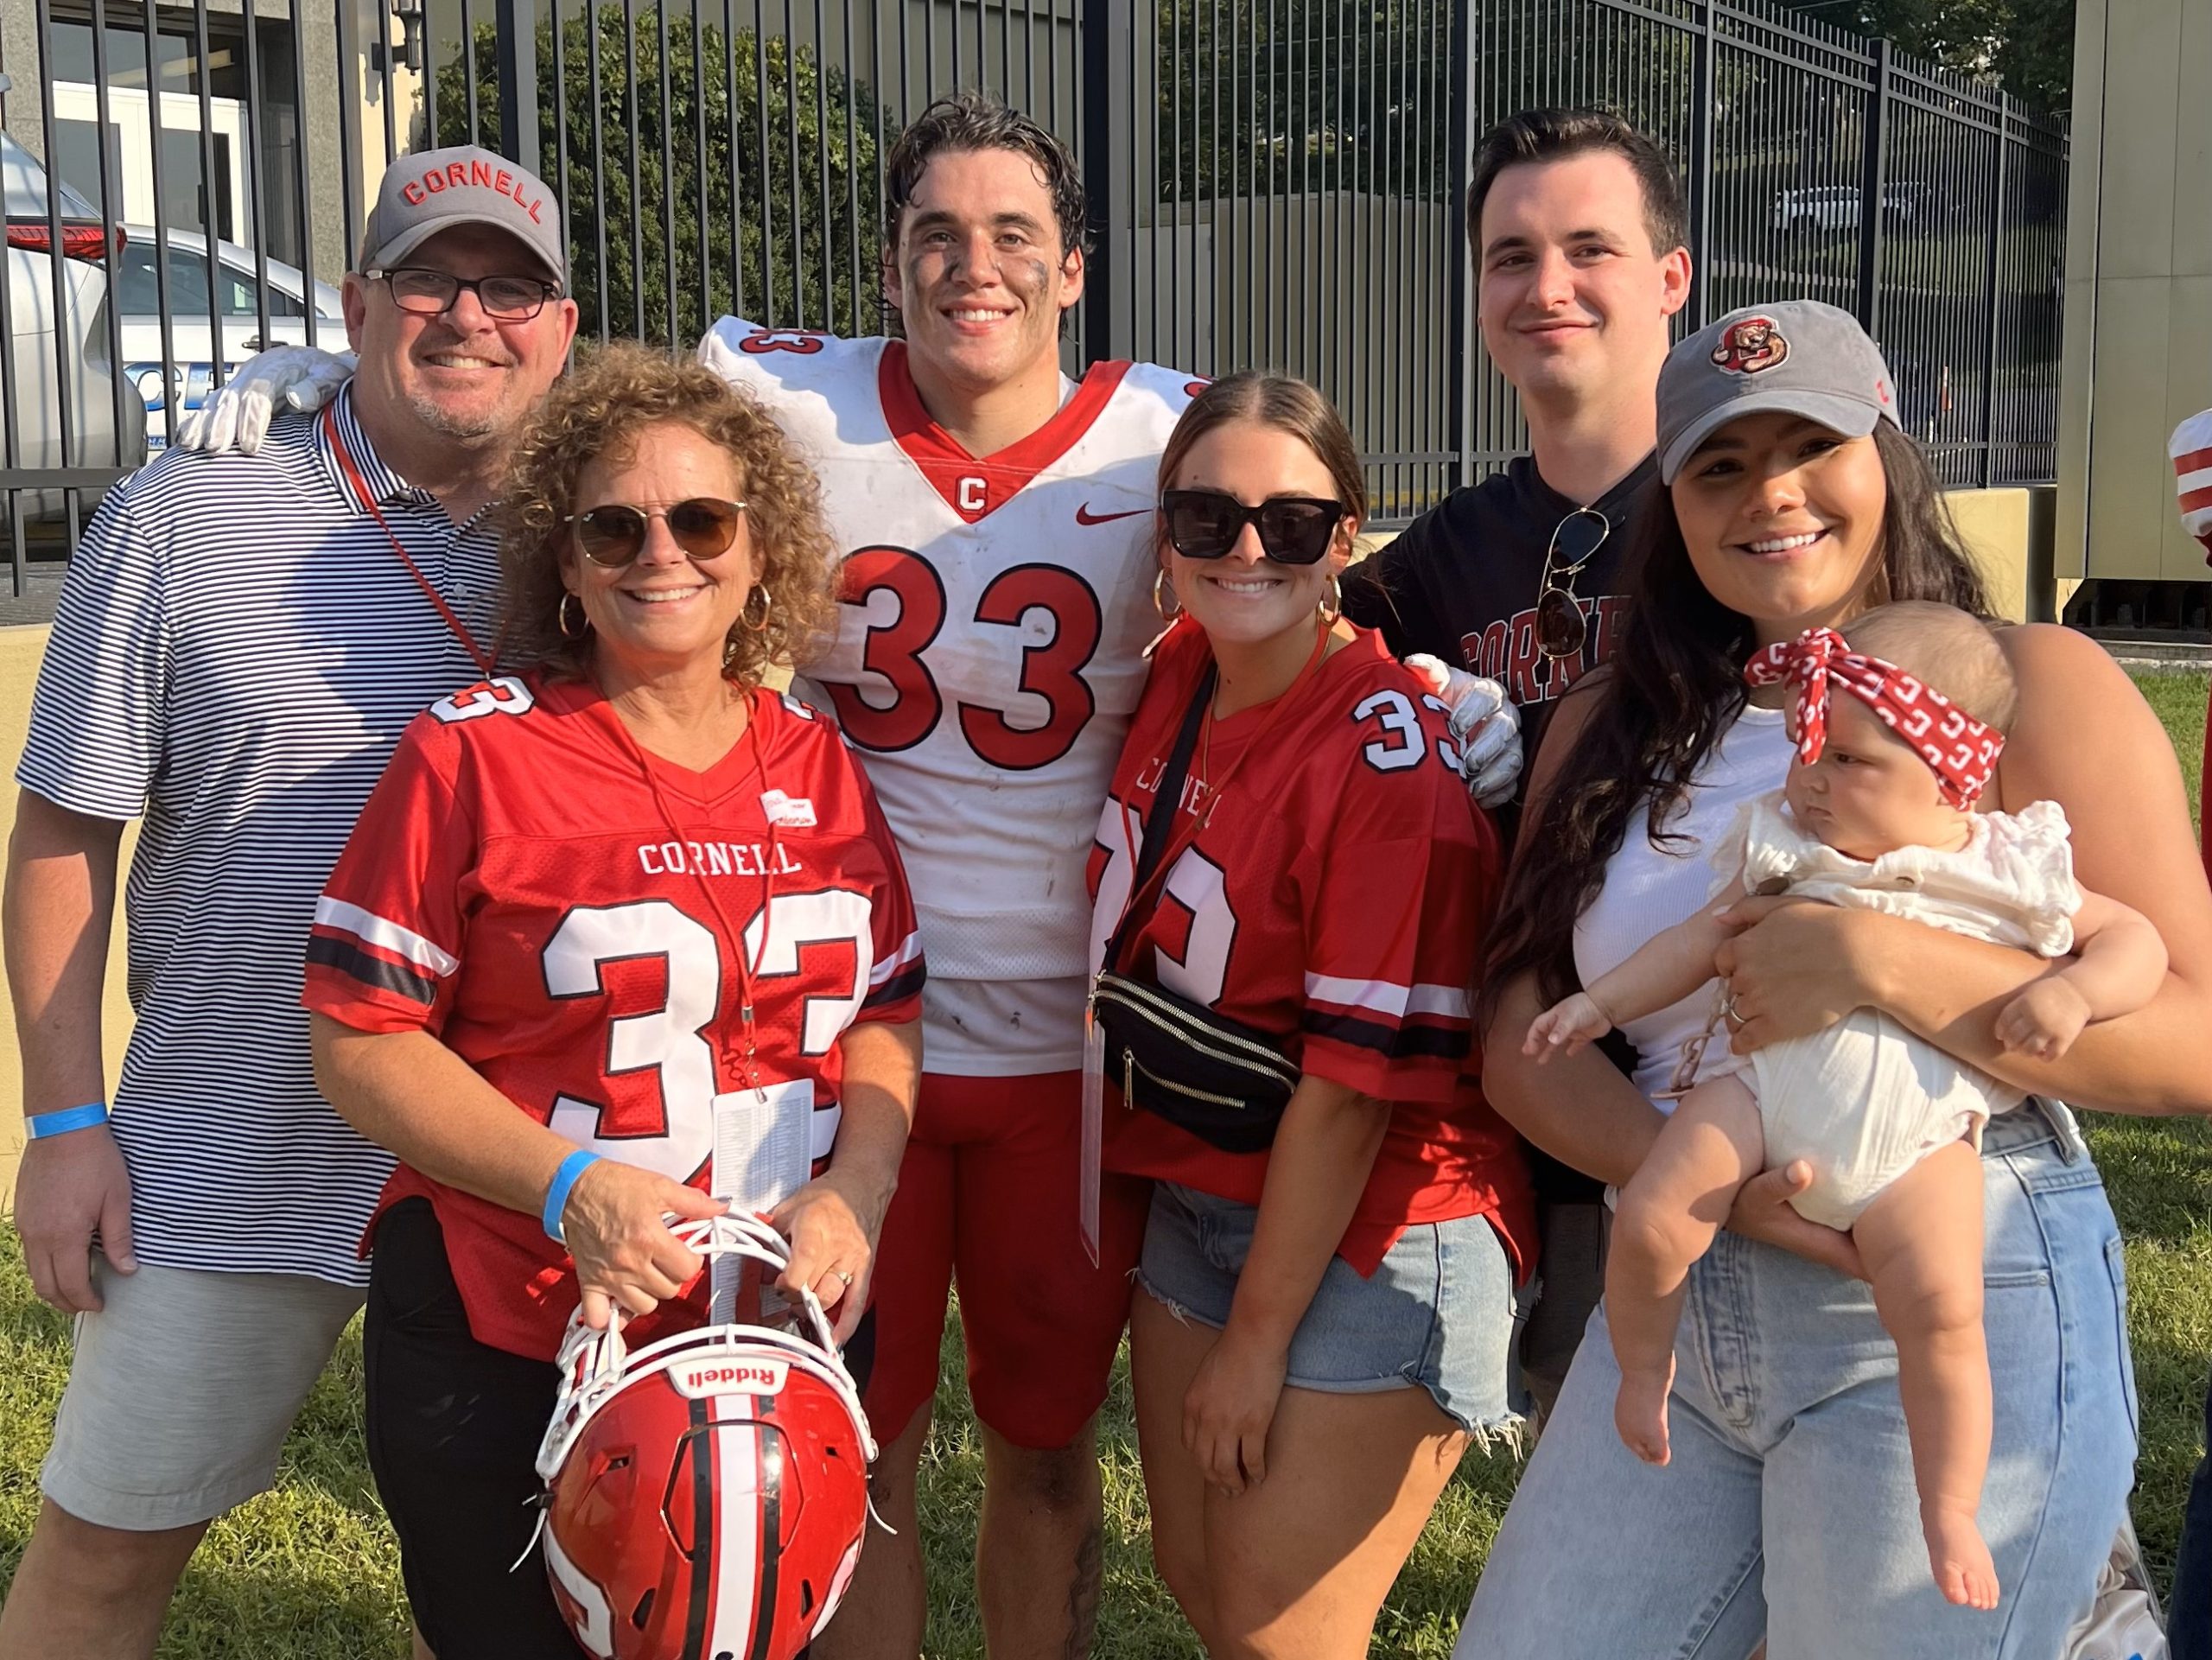 Employee Spotlight Carolyn Henderson. Carolyn wears a Cornell football jersey with the number 33 on it. She is standing next to her husband and son, who is wearing his full Cornell football uniform. Text: “I work with area schools to help them produce the yearbook of their dreams. This means I actively teach in the classroom, educating students and teachers about design, copy writing, photography, marketing, and basically how to run a small business.” Carolyn Henderson, Yearbook Sales Representative, Matthews, North Carolina